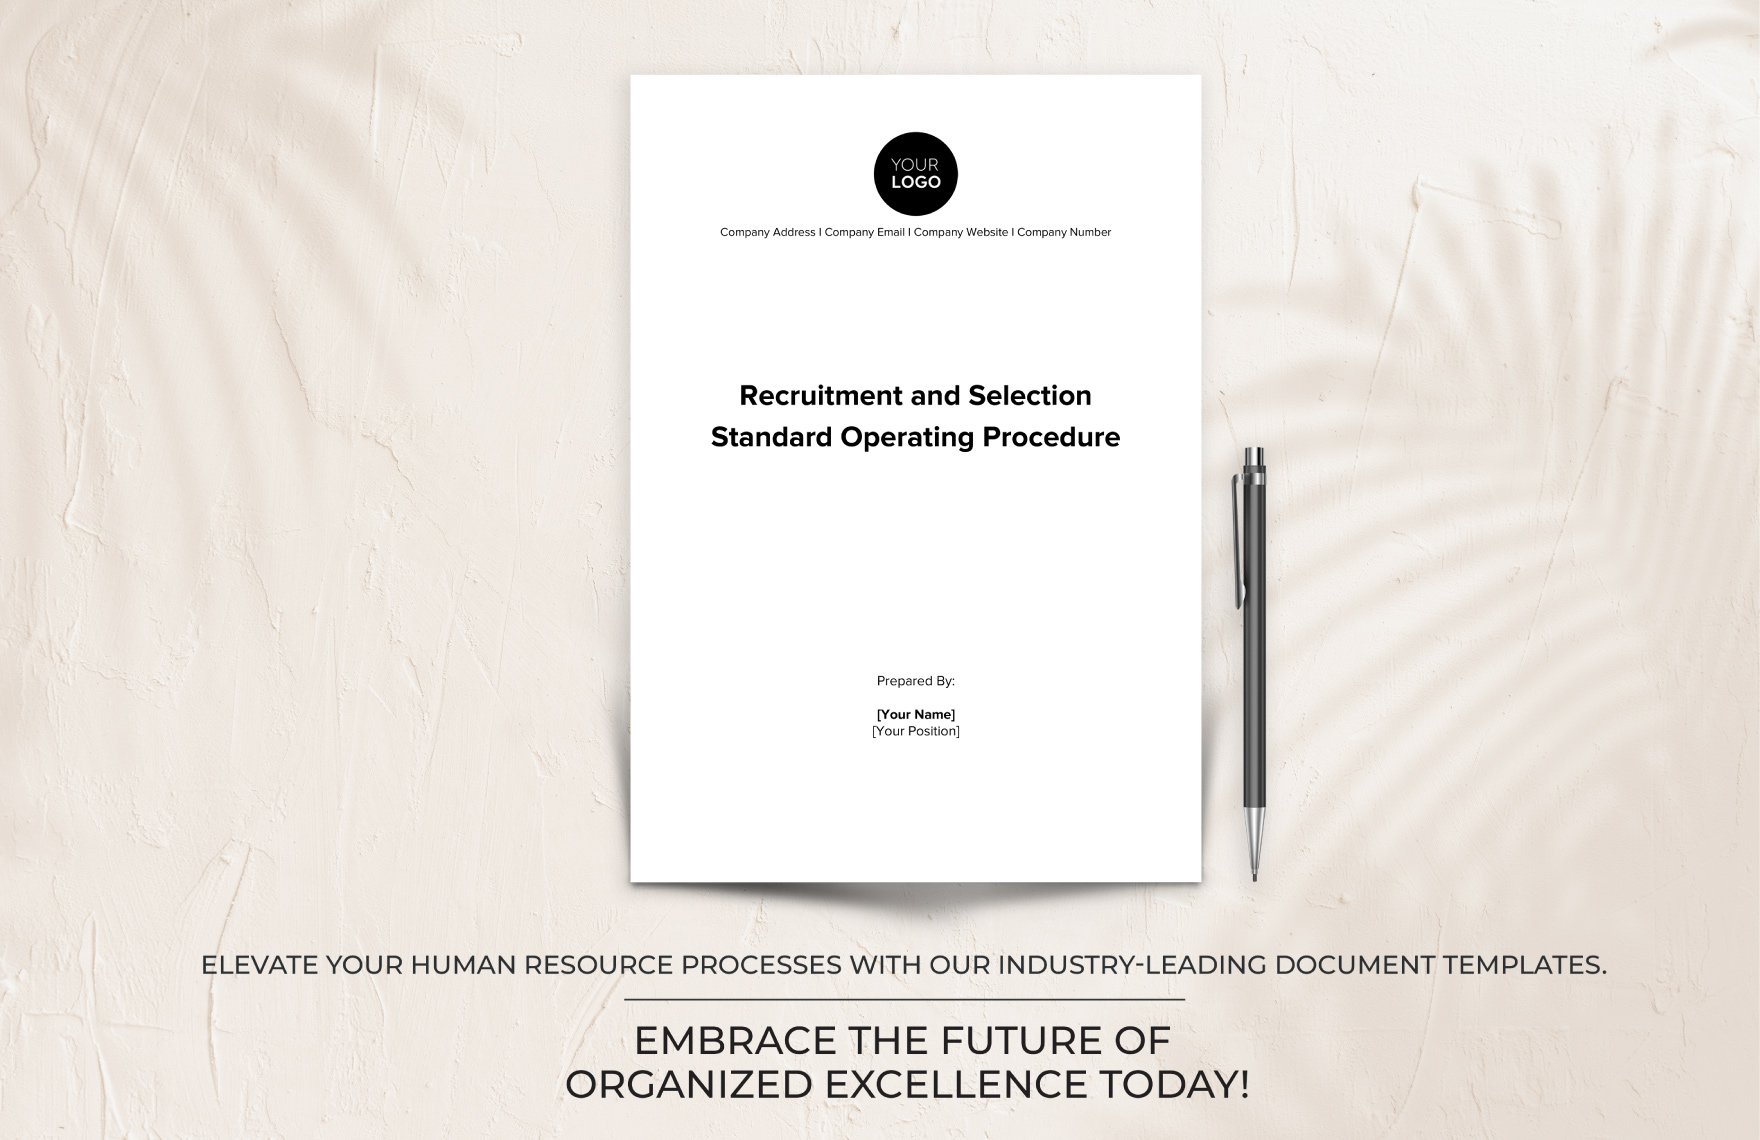 Recruitment and Selection Standard Operating Procedure (SOP) HR Template